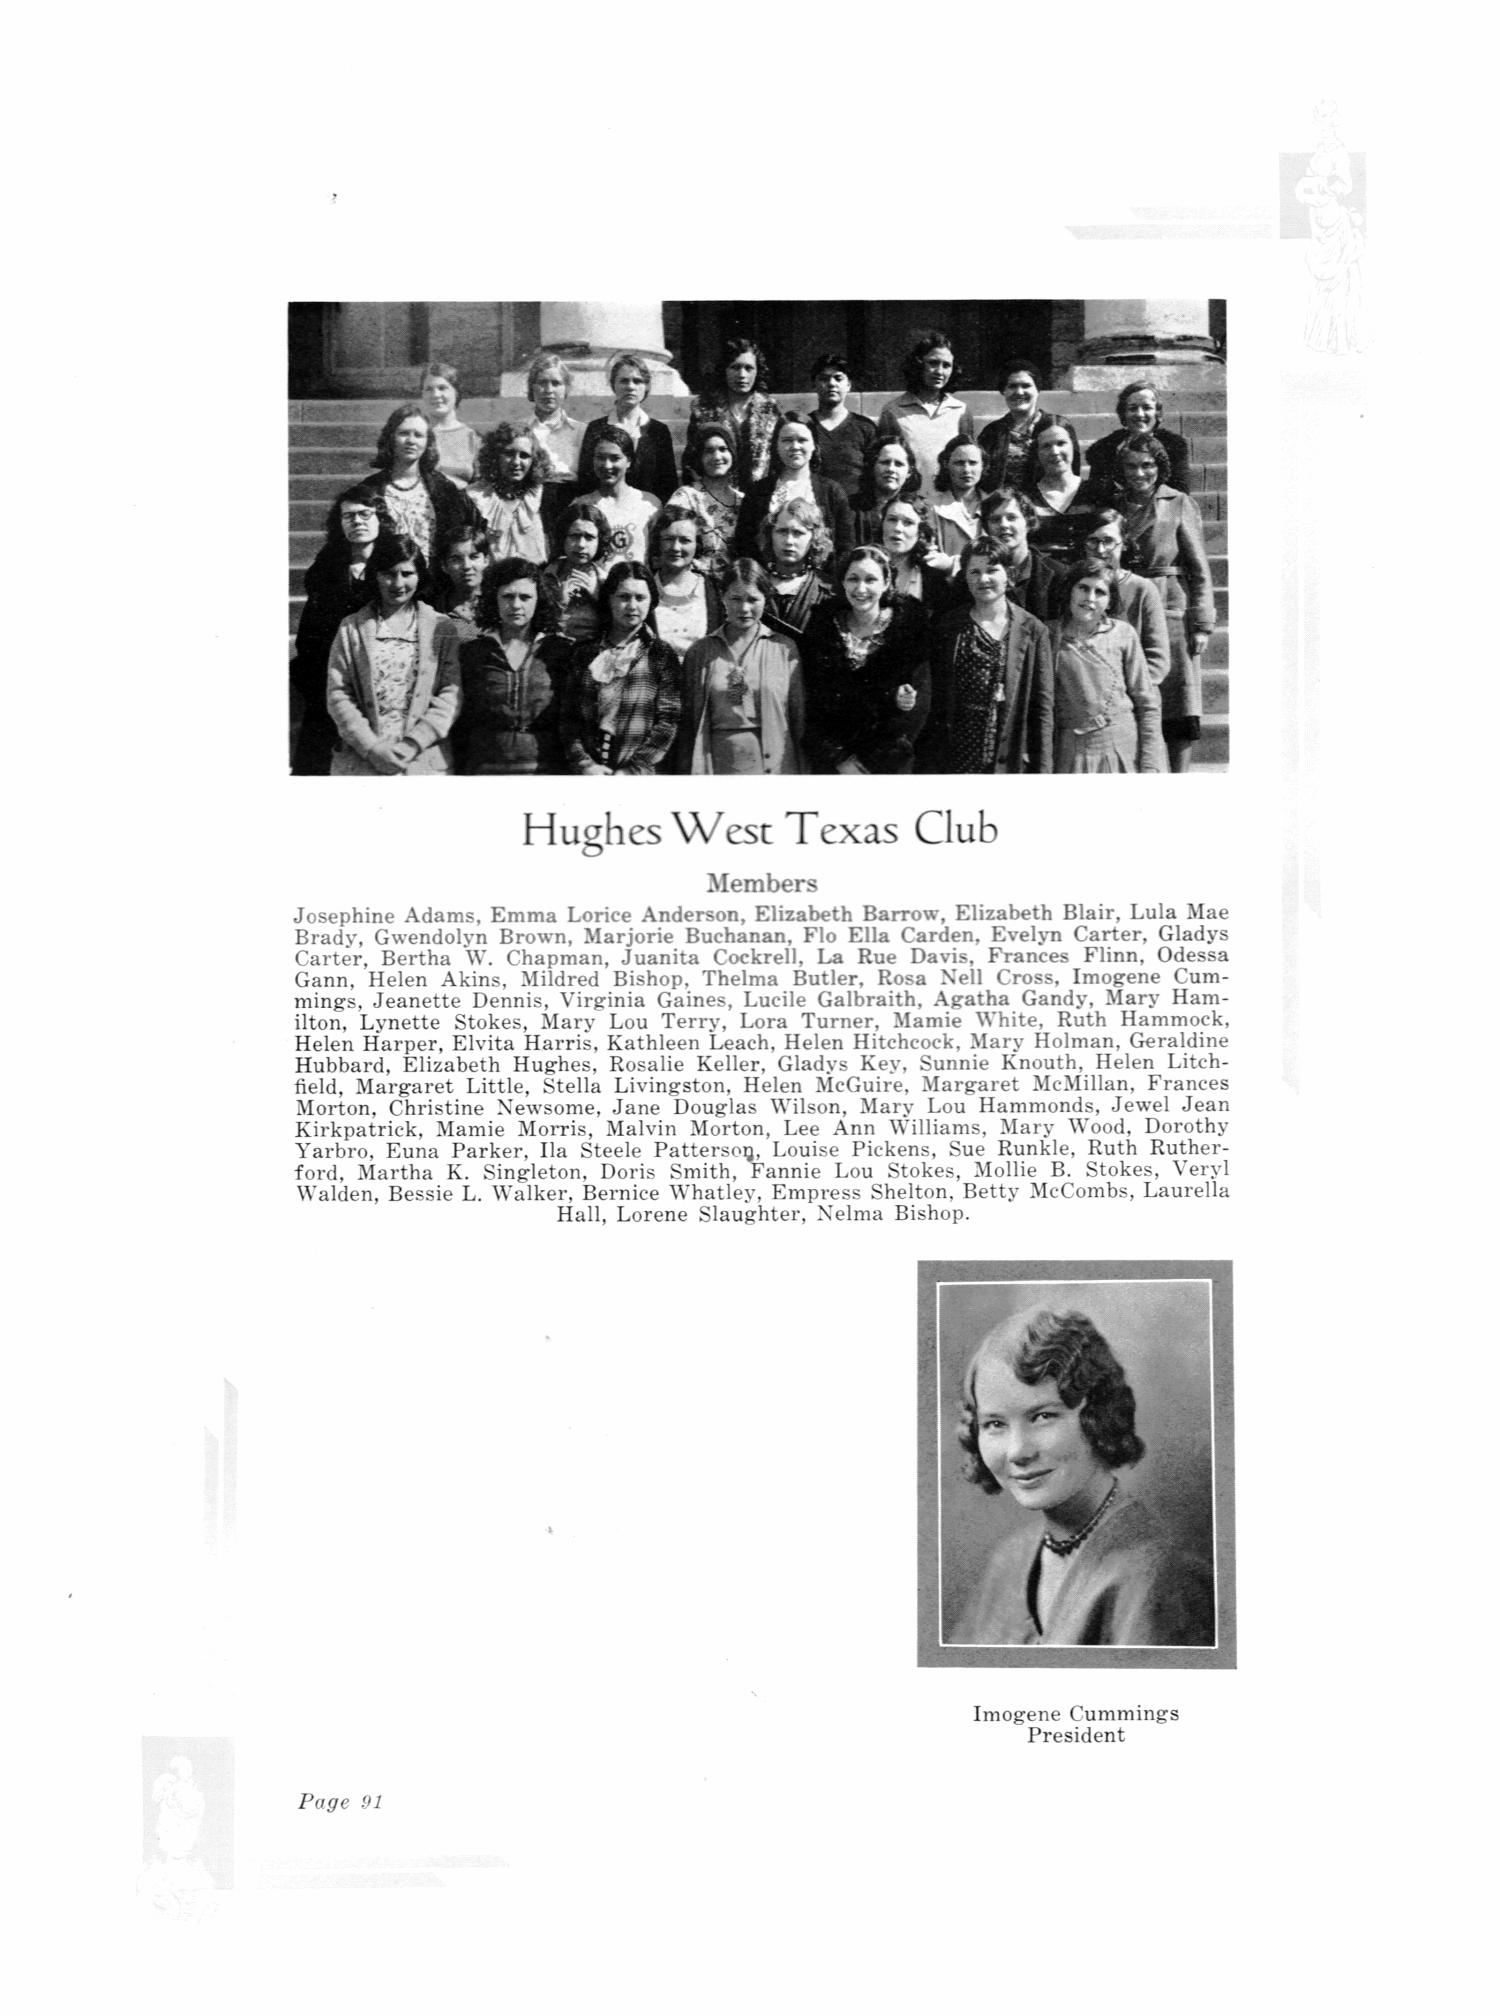 TXWOCO, Yearbook of Texas Woman's College, 1931
                                                
                                                    91
                                                